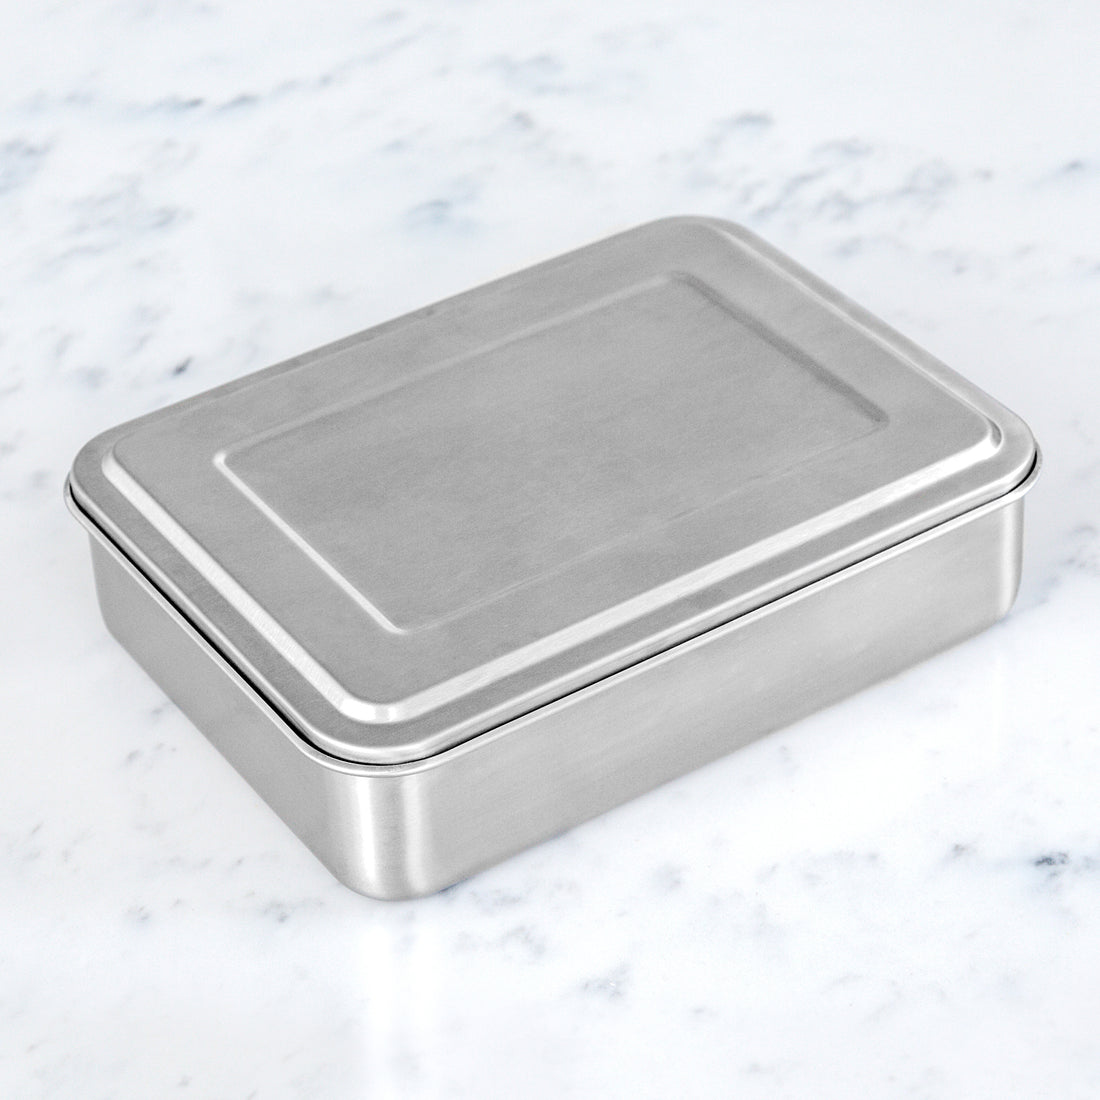 ONEUP Portable Compartment Insulation Metal Bento Lunch Box Stainless Steel  304 Japanese Office Staff Separated Microwave Heating Bento Box 210818 From  Xue009, $18.35